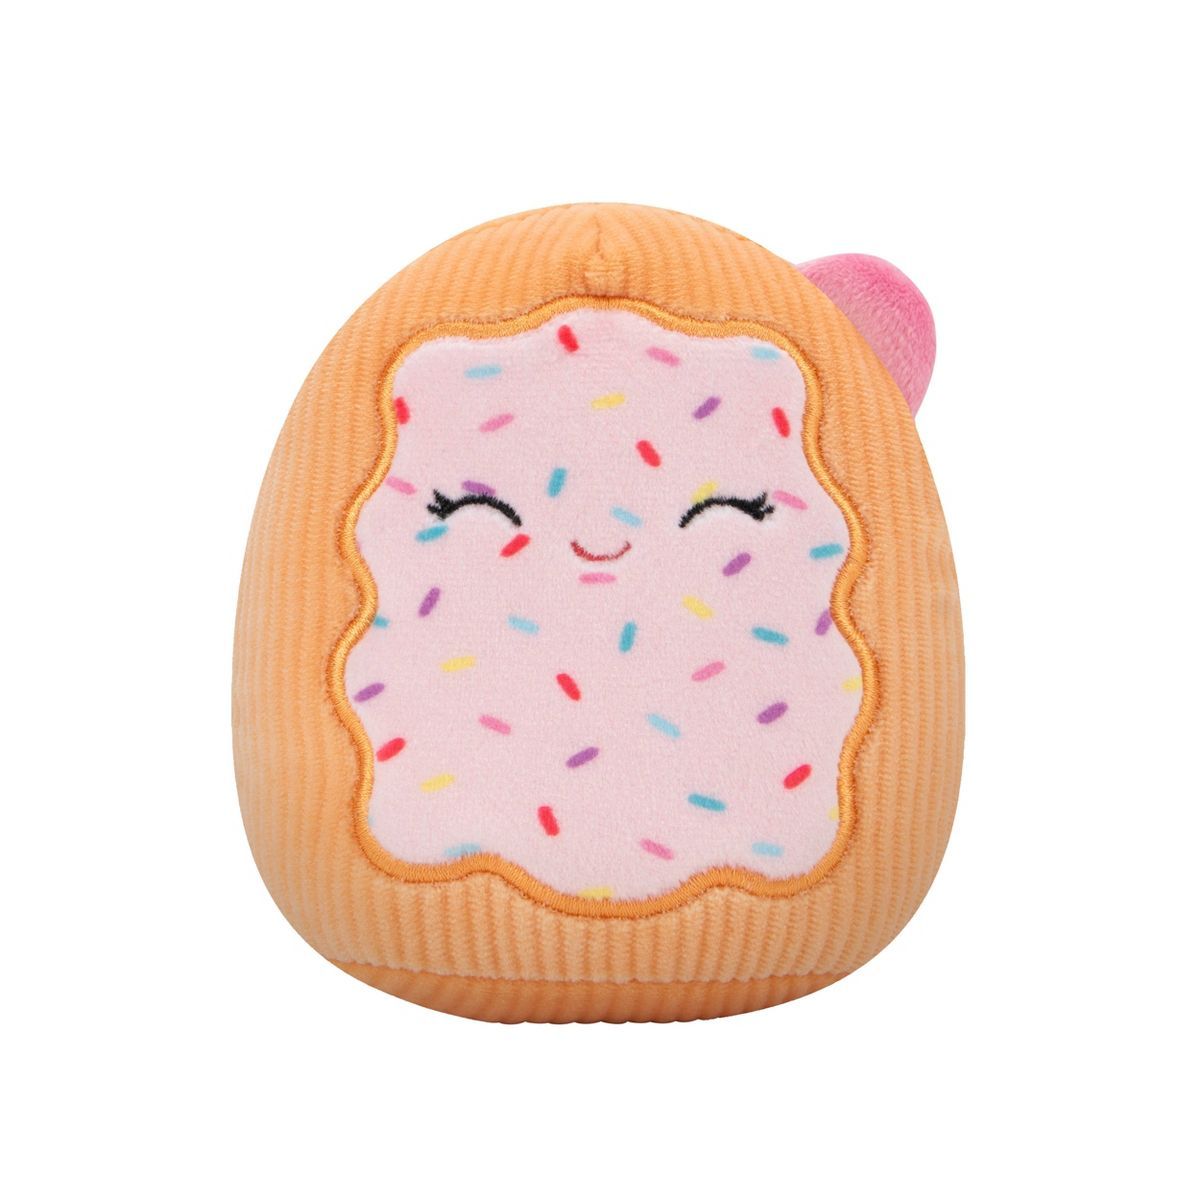 Squishmallows 3.5" Fresa The Toaster Pastry Squeaky Plush Dog Toy | Target